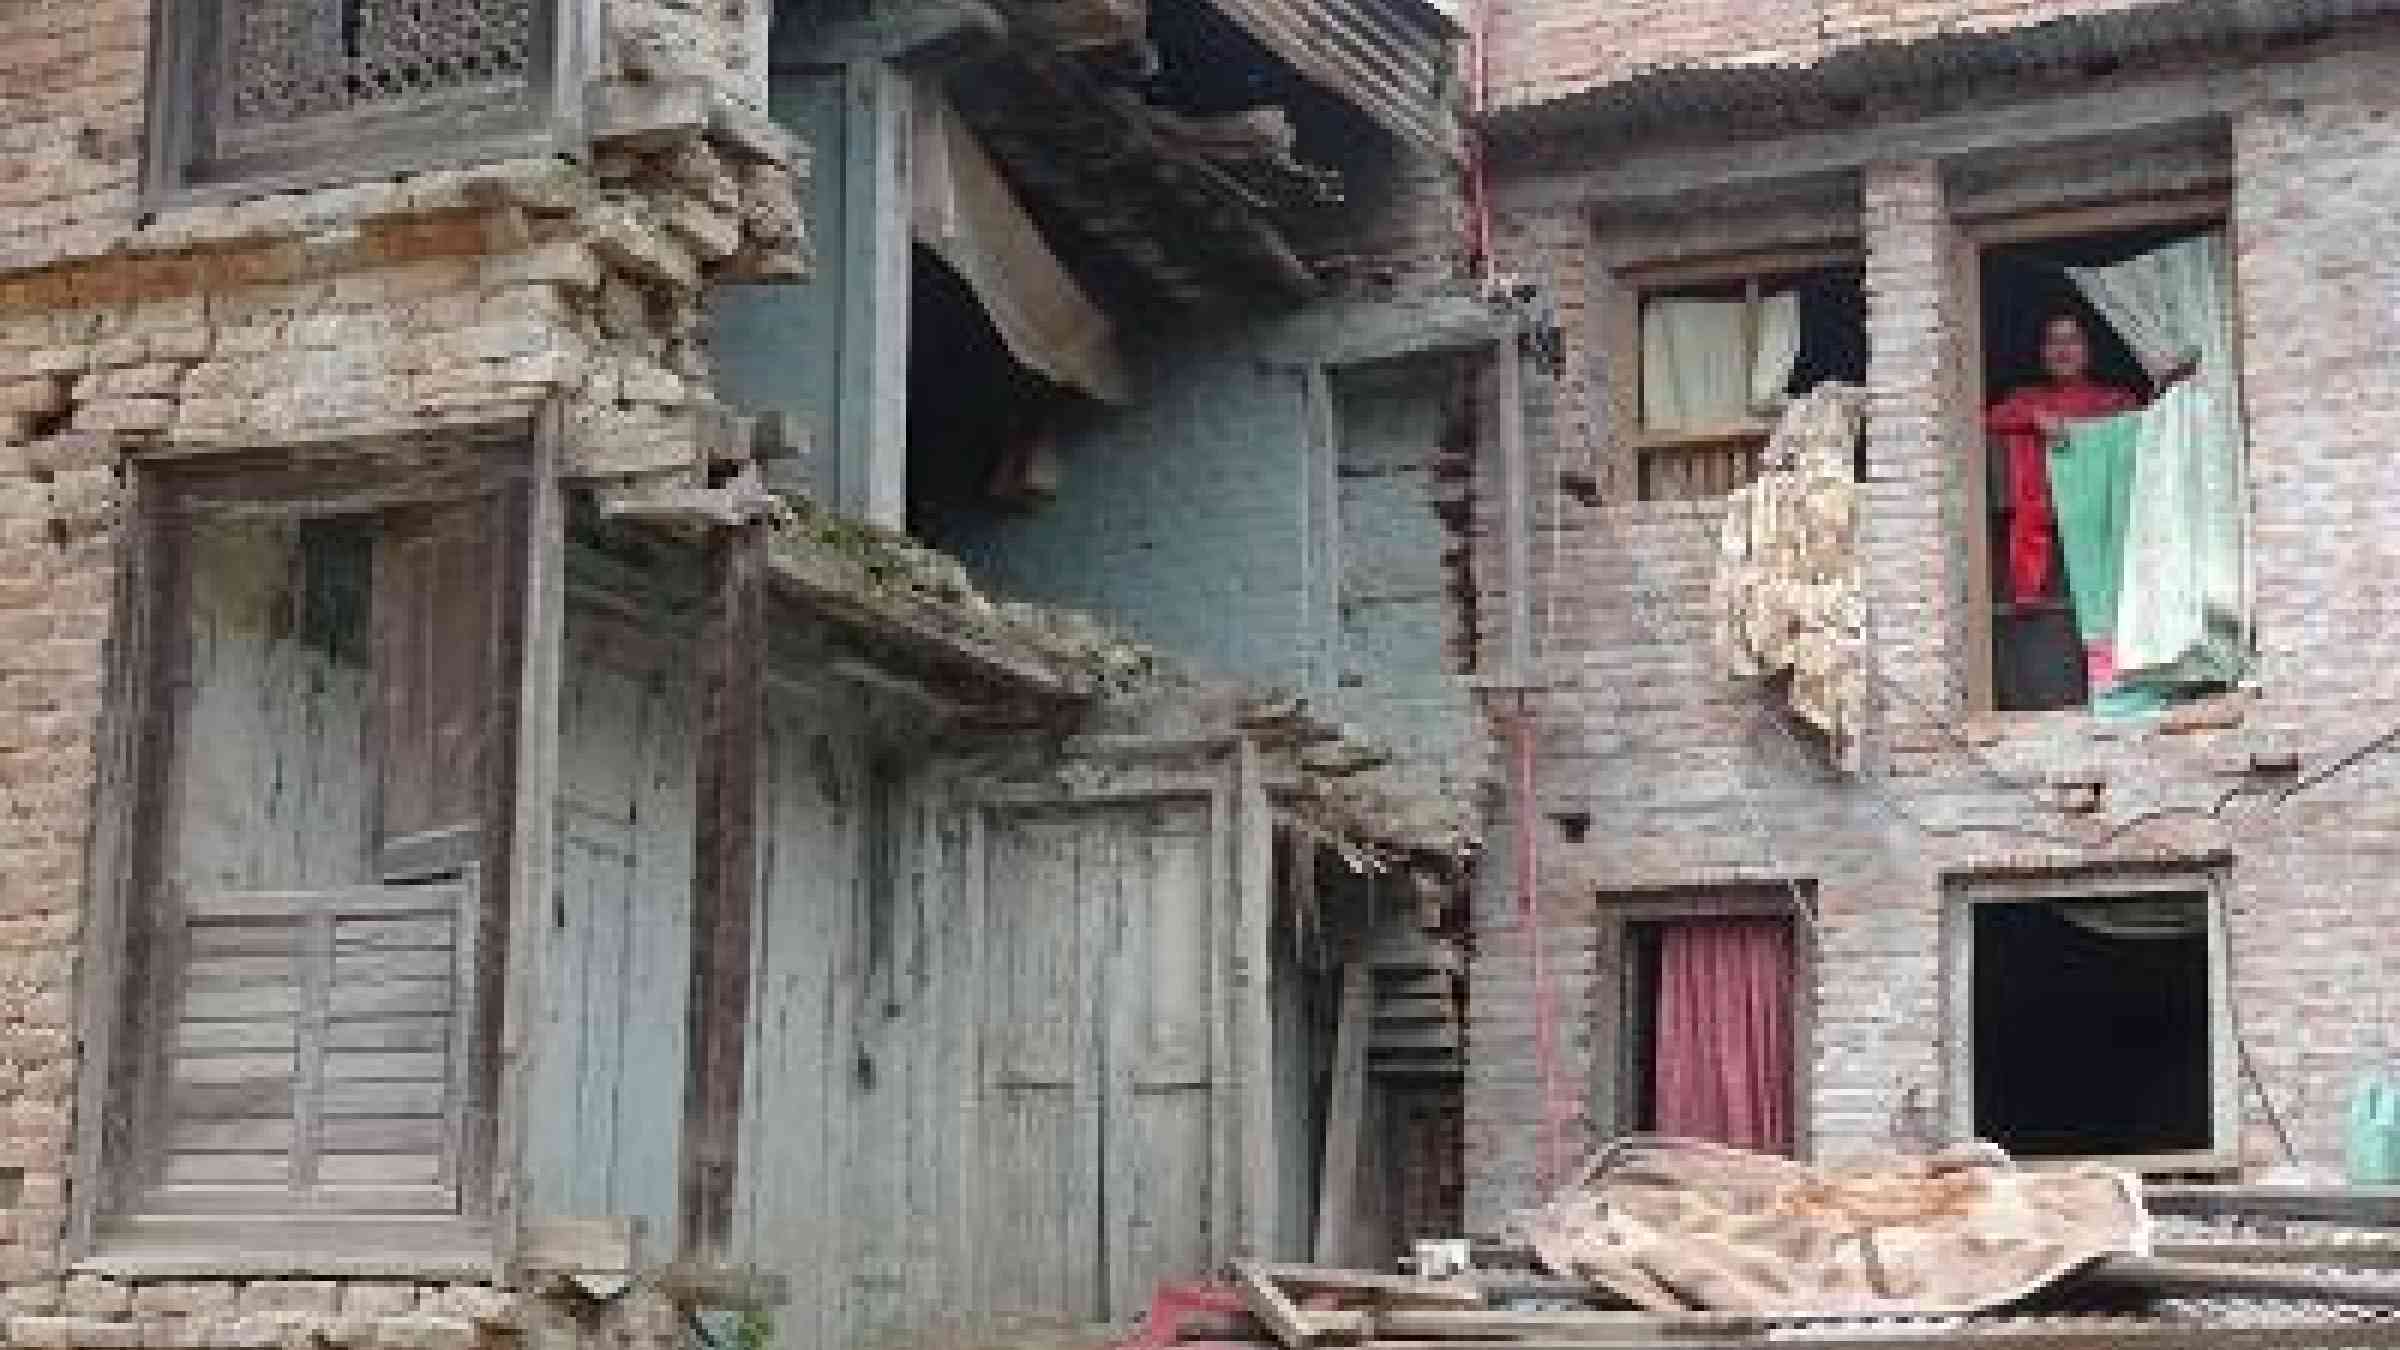 A partly repaired house in the historic Bungamati district of the Kathmandu Valley